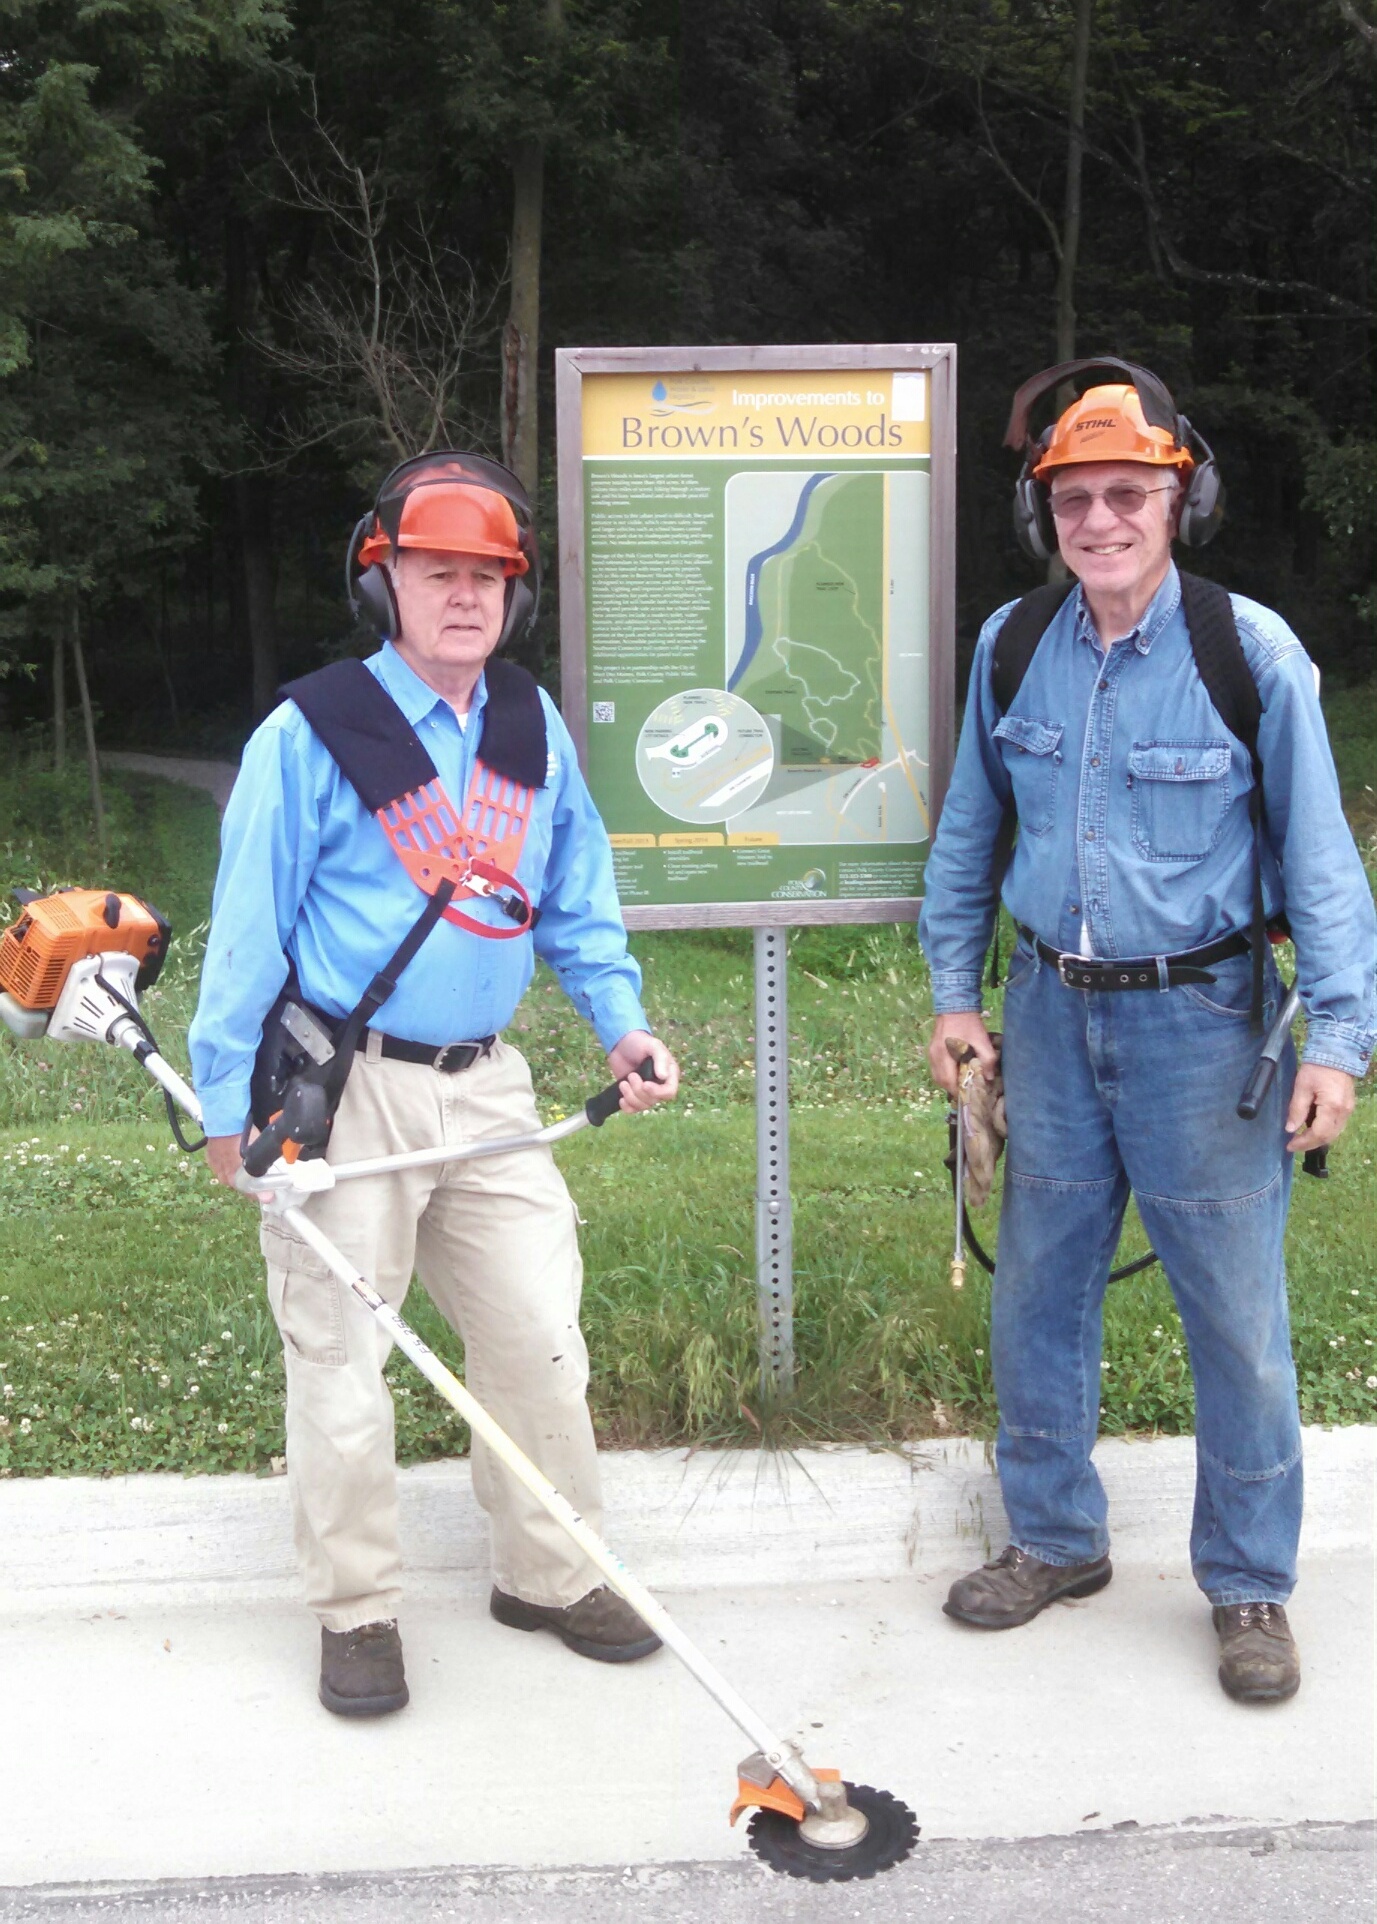 Ron Eckoff (right) is pictured with John Zeitler (left) volunteering.